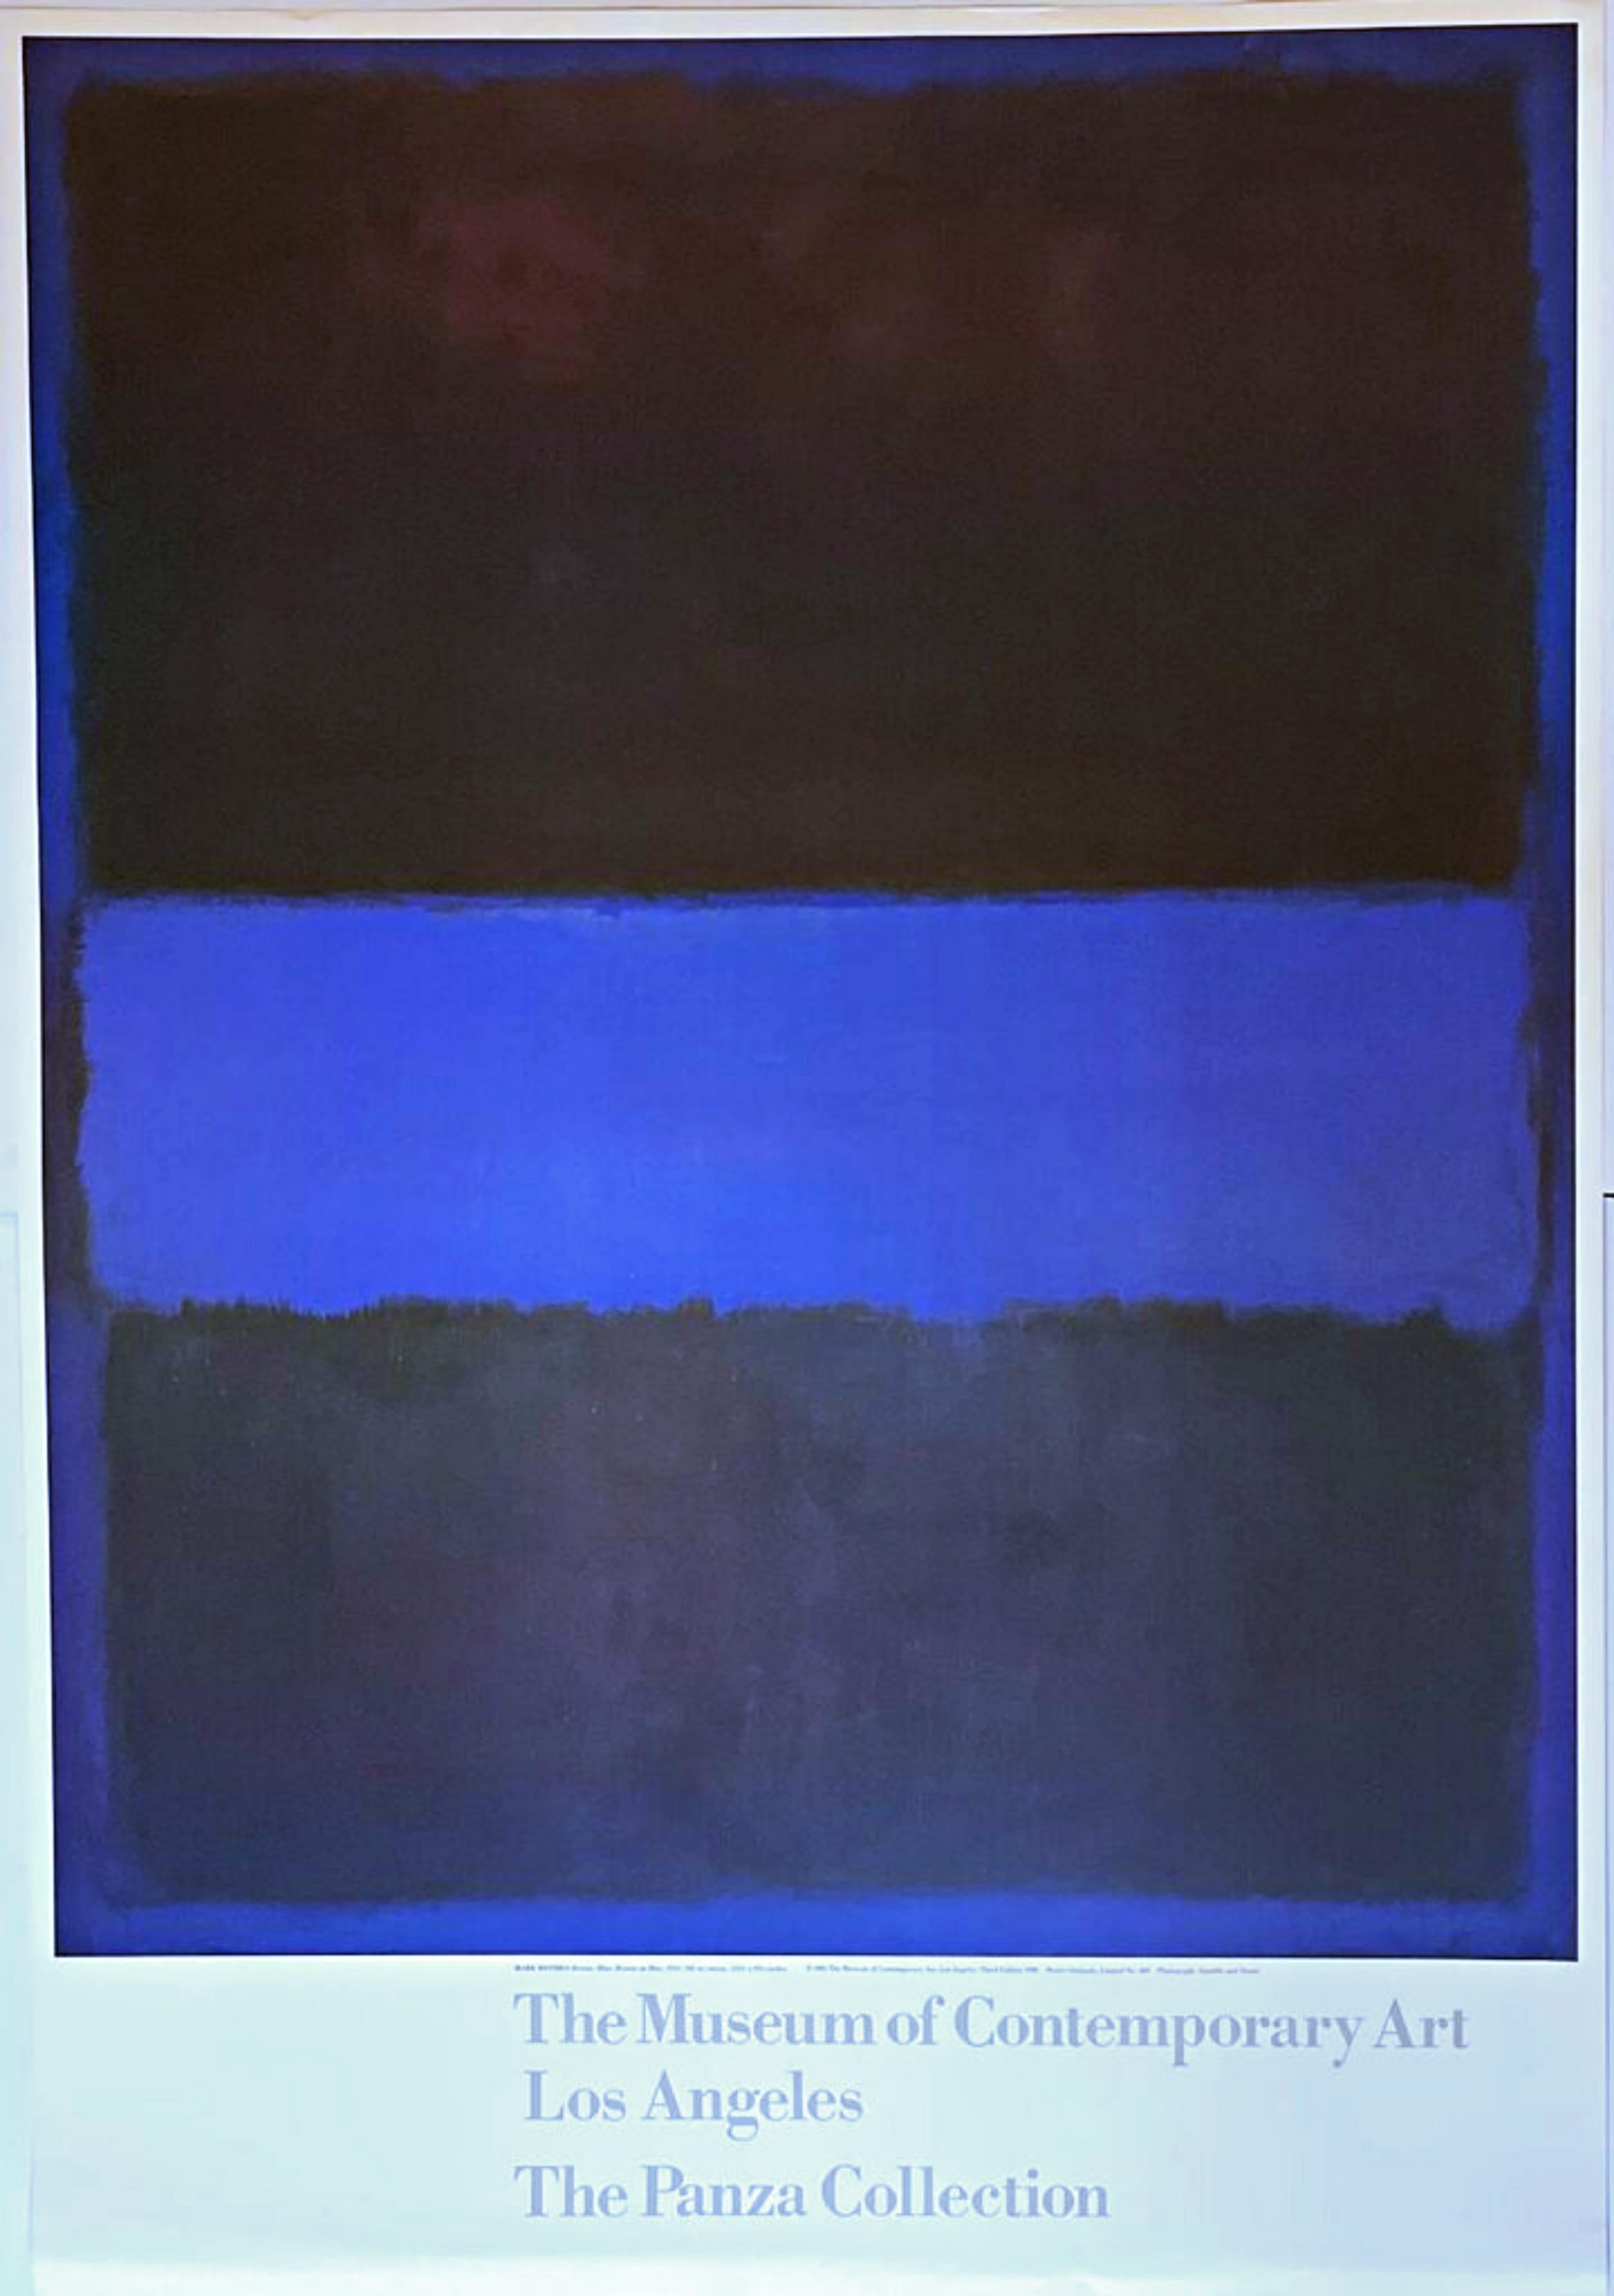 Mark Rothko Abstract Print - Museum of Contemporary Art Los Angeles, Limited Edition Panza Collection poster